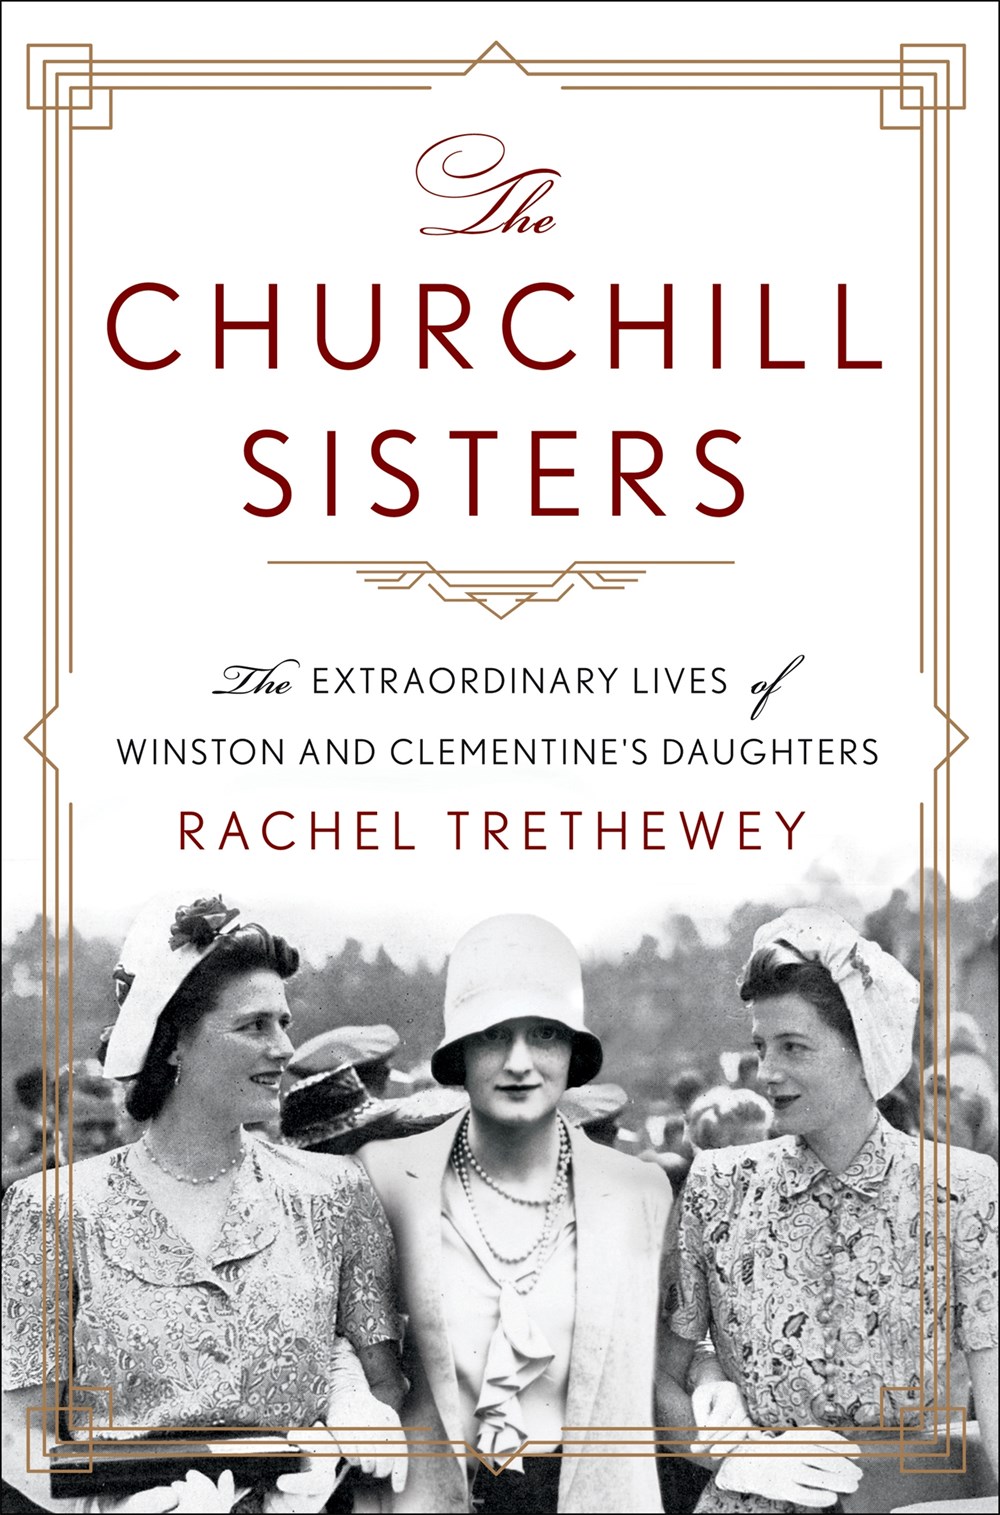 Image for "The Churchill Sisters"